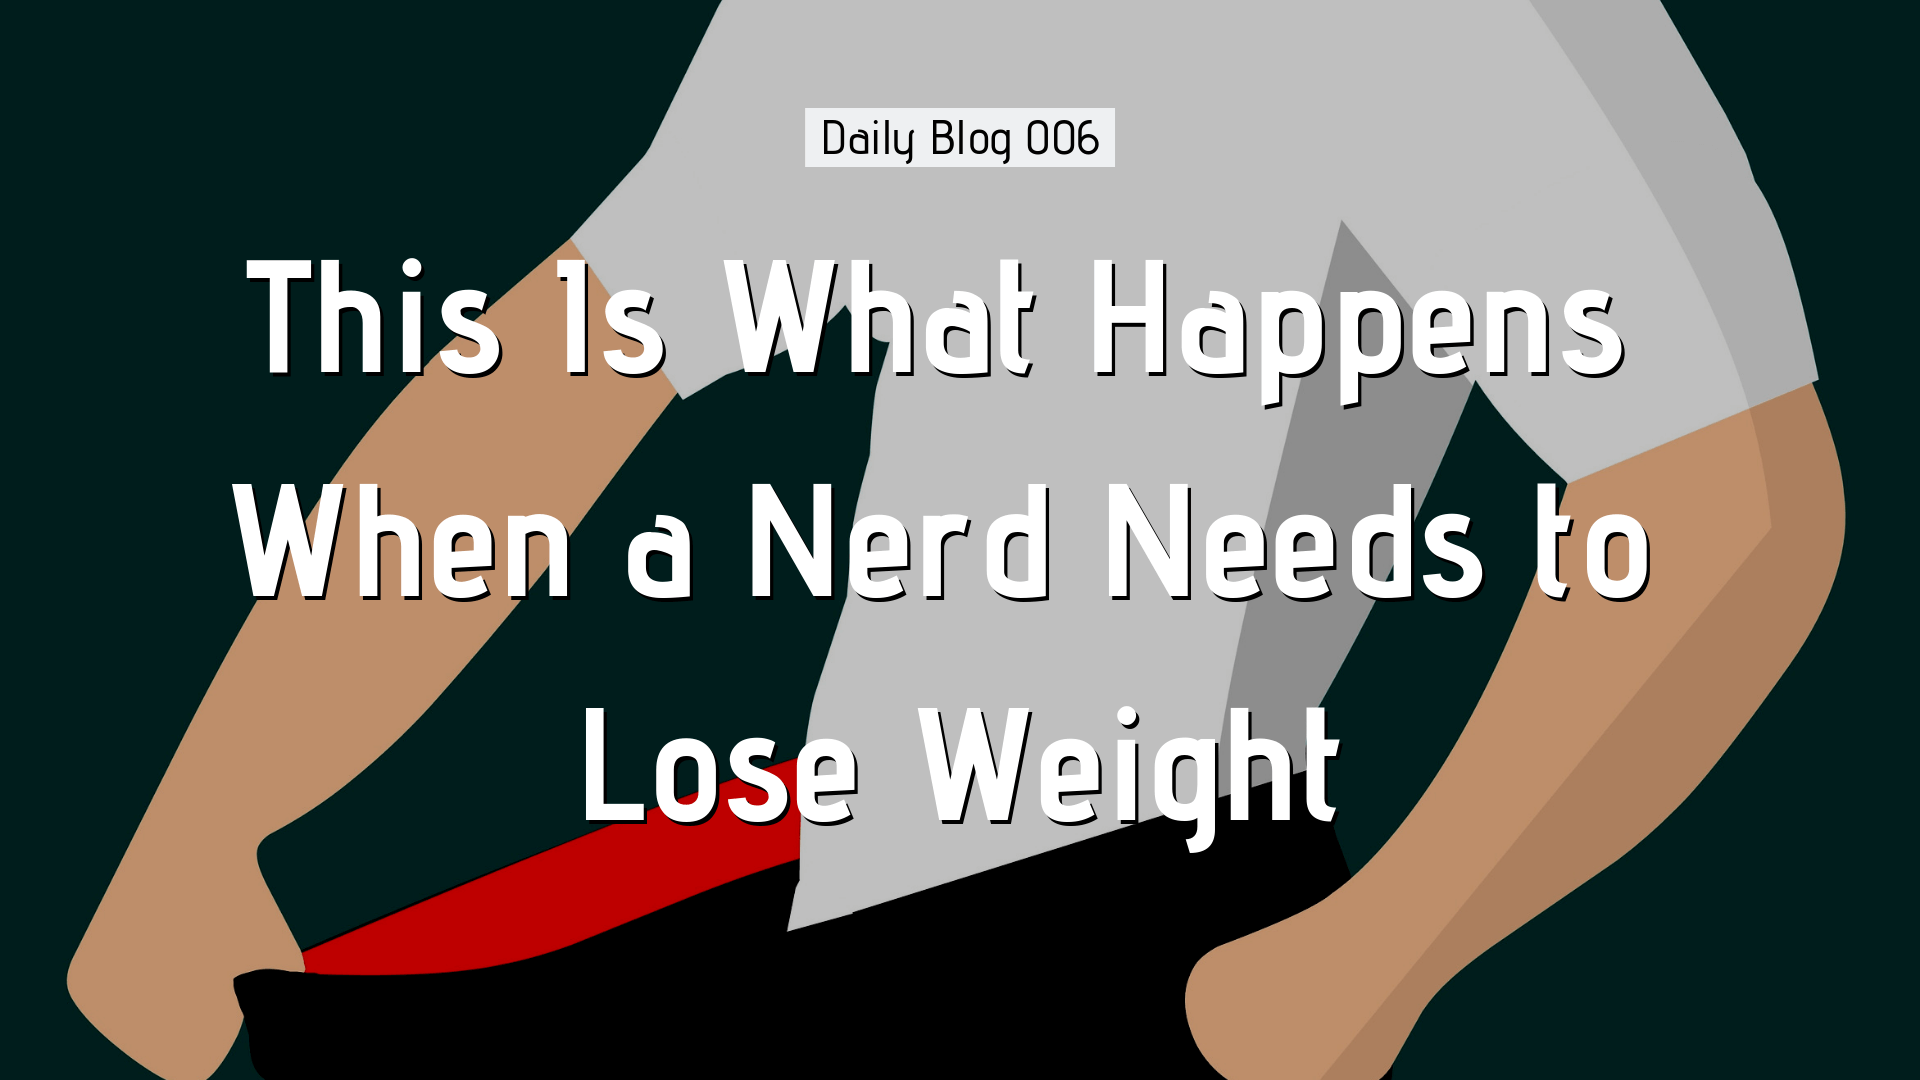 blog-006-when-a-nerd-needs-to-lose-weight.png